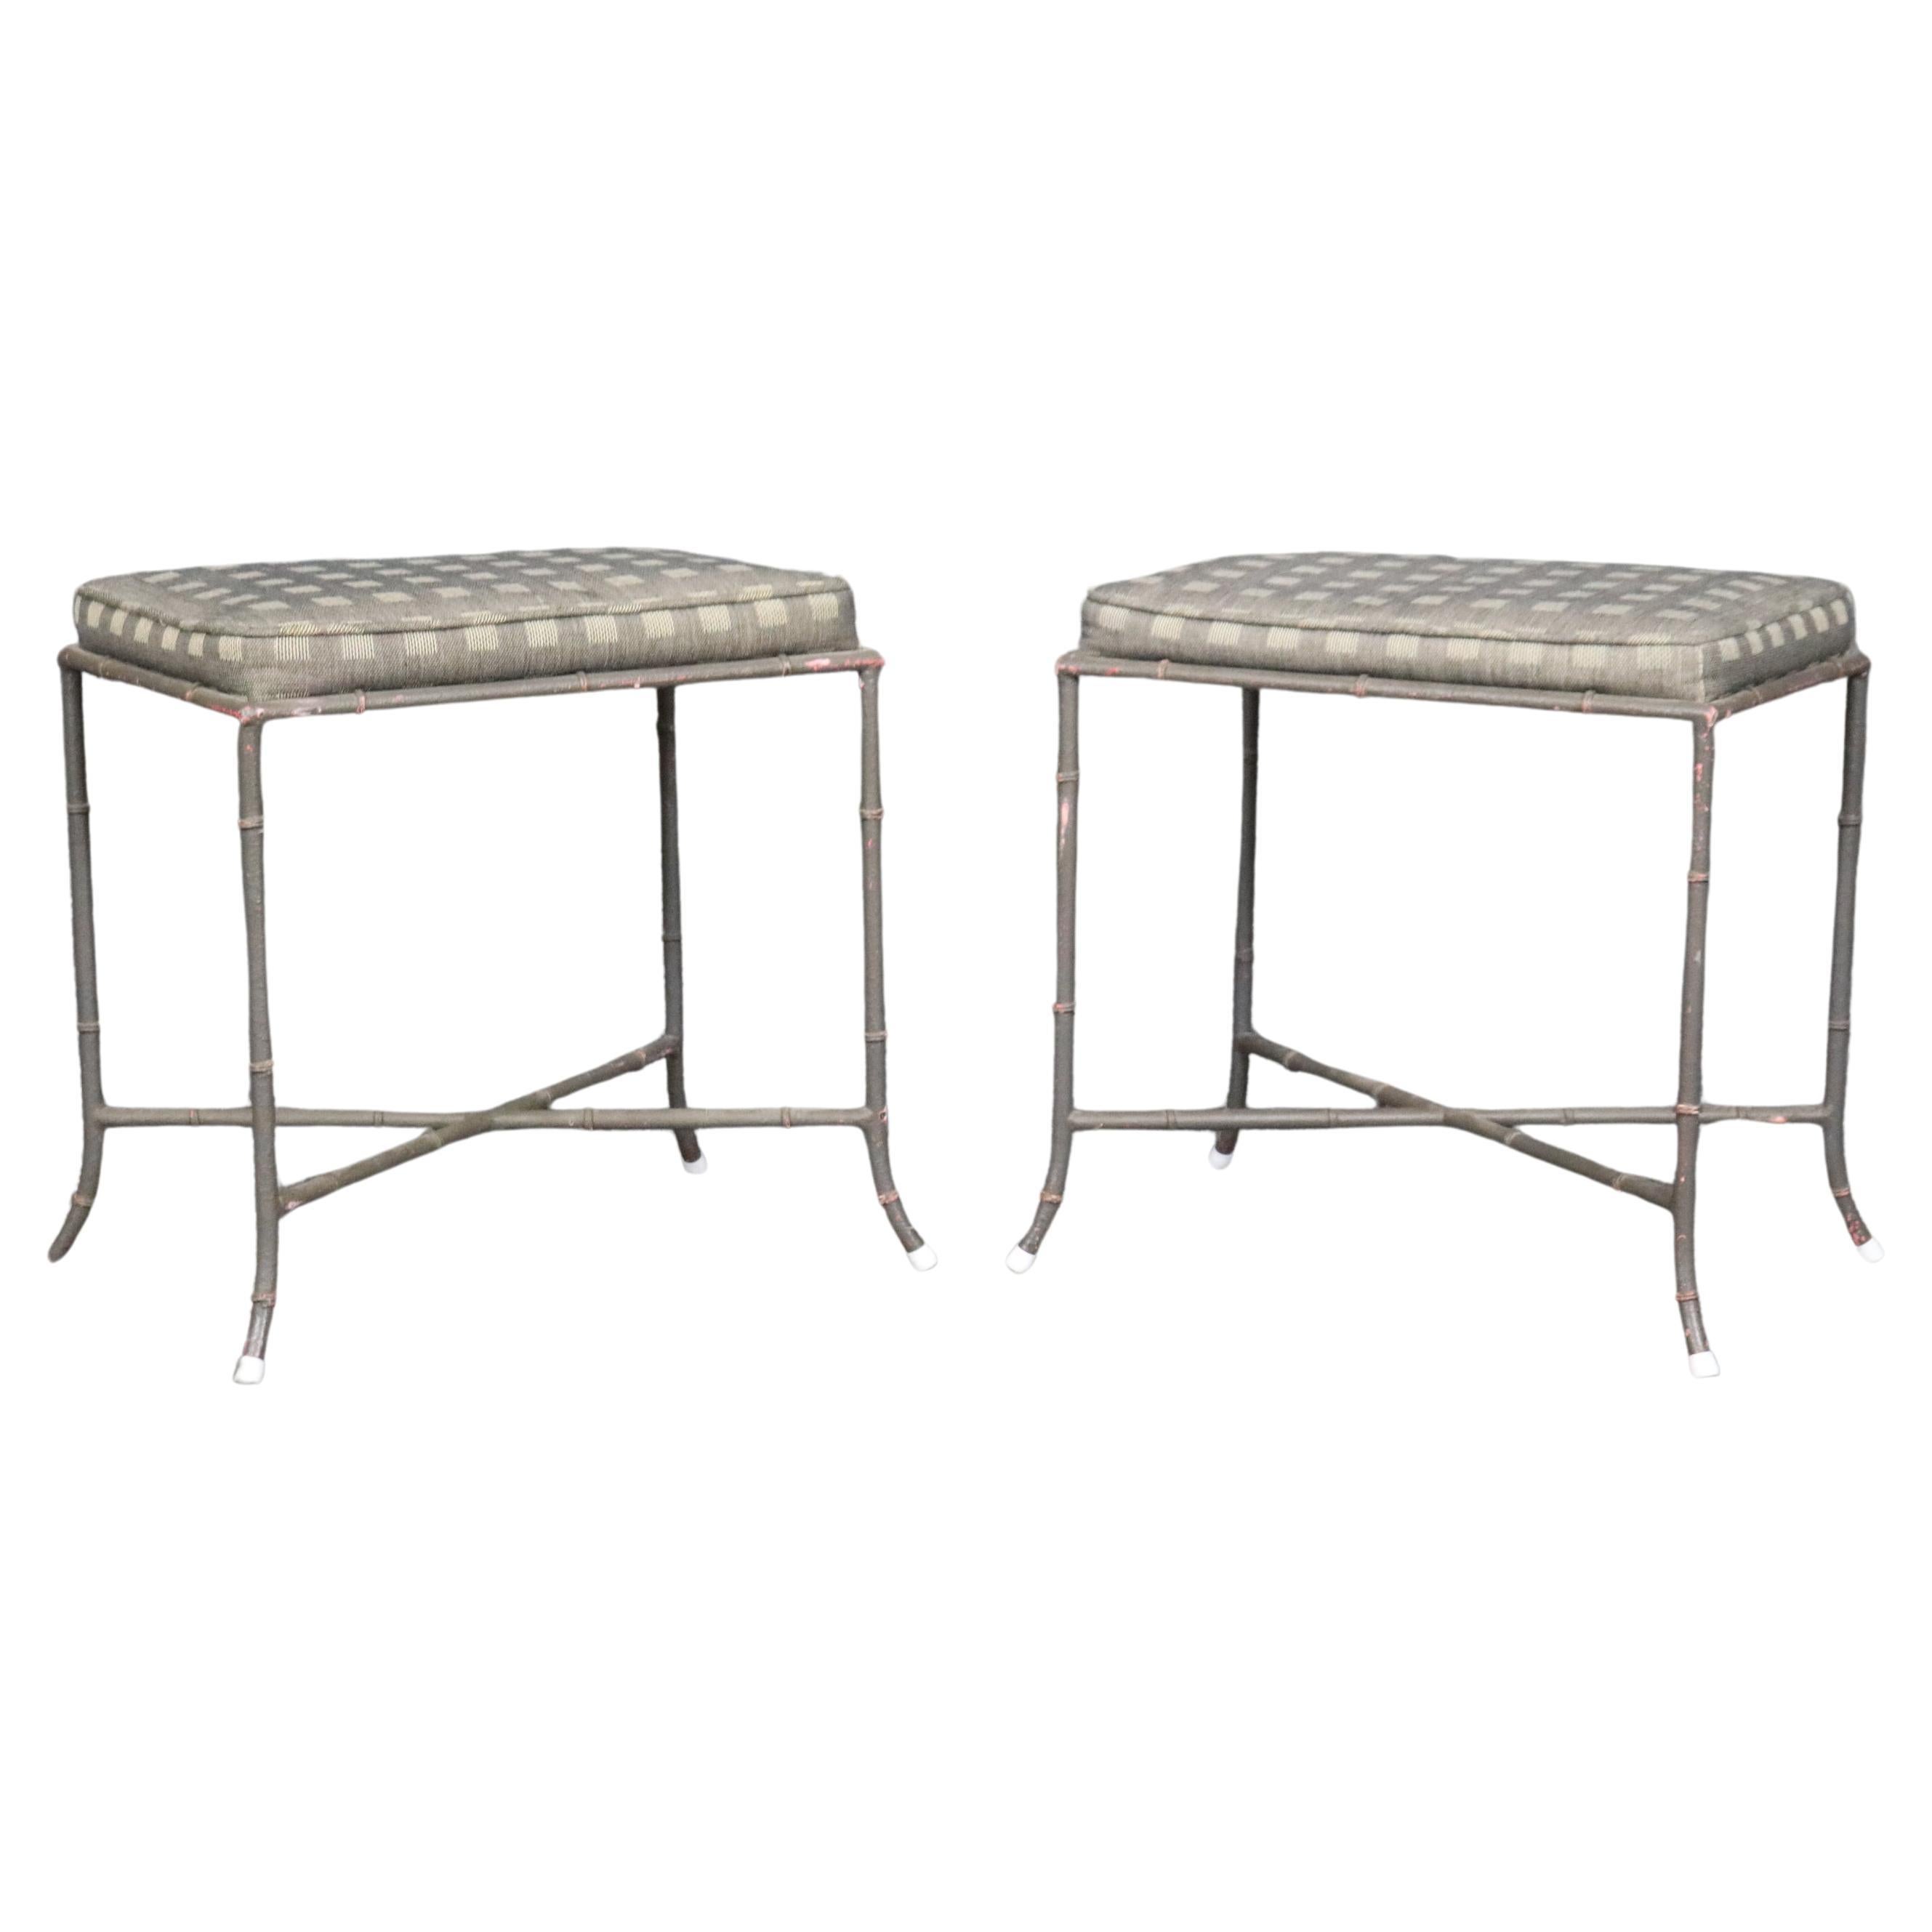 Pair of Maison Bagues Style Faux Bamboo Metal French Benches or Foot Stools  For Sale